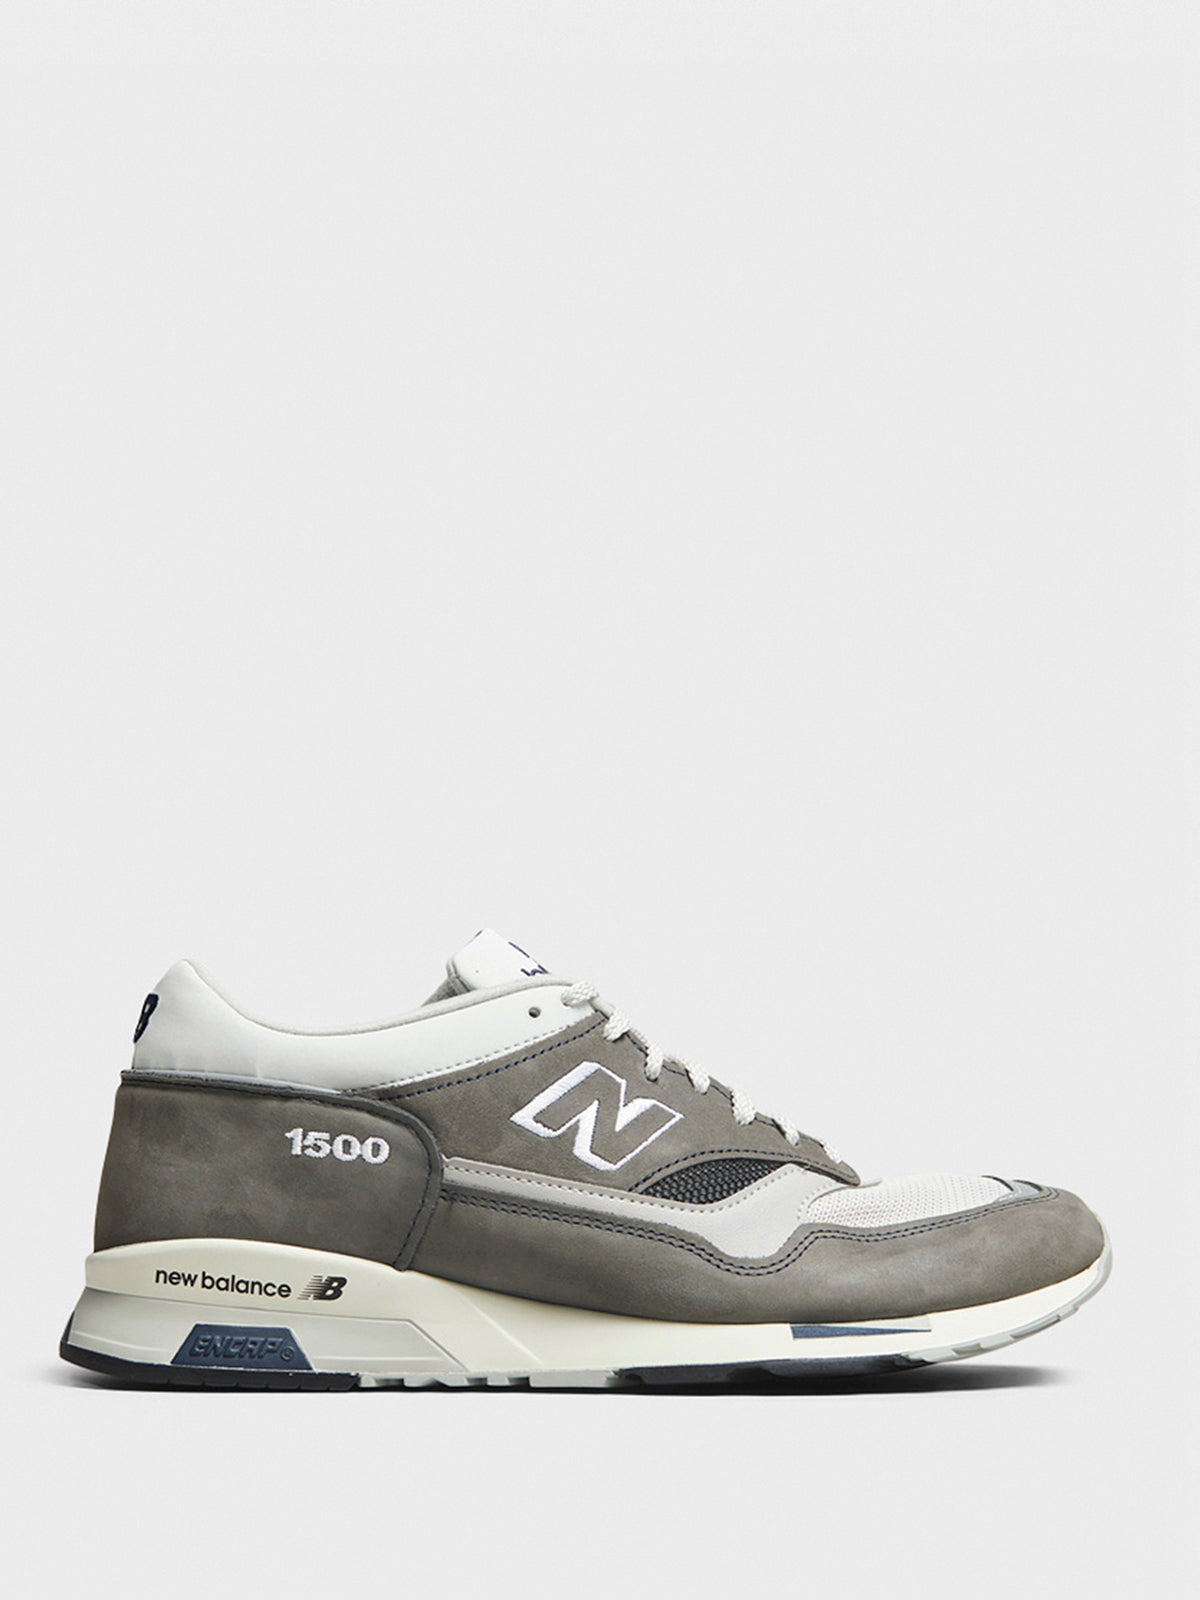 New Balance - 1500 Sneakers in Grey